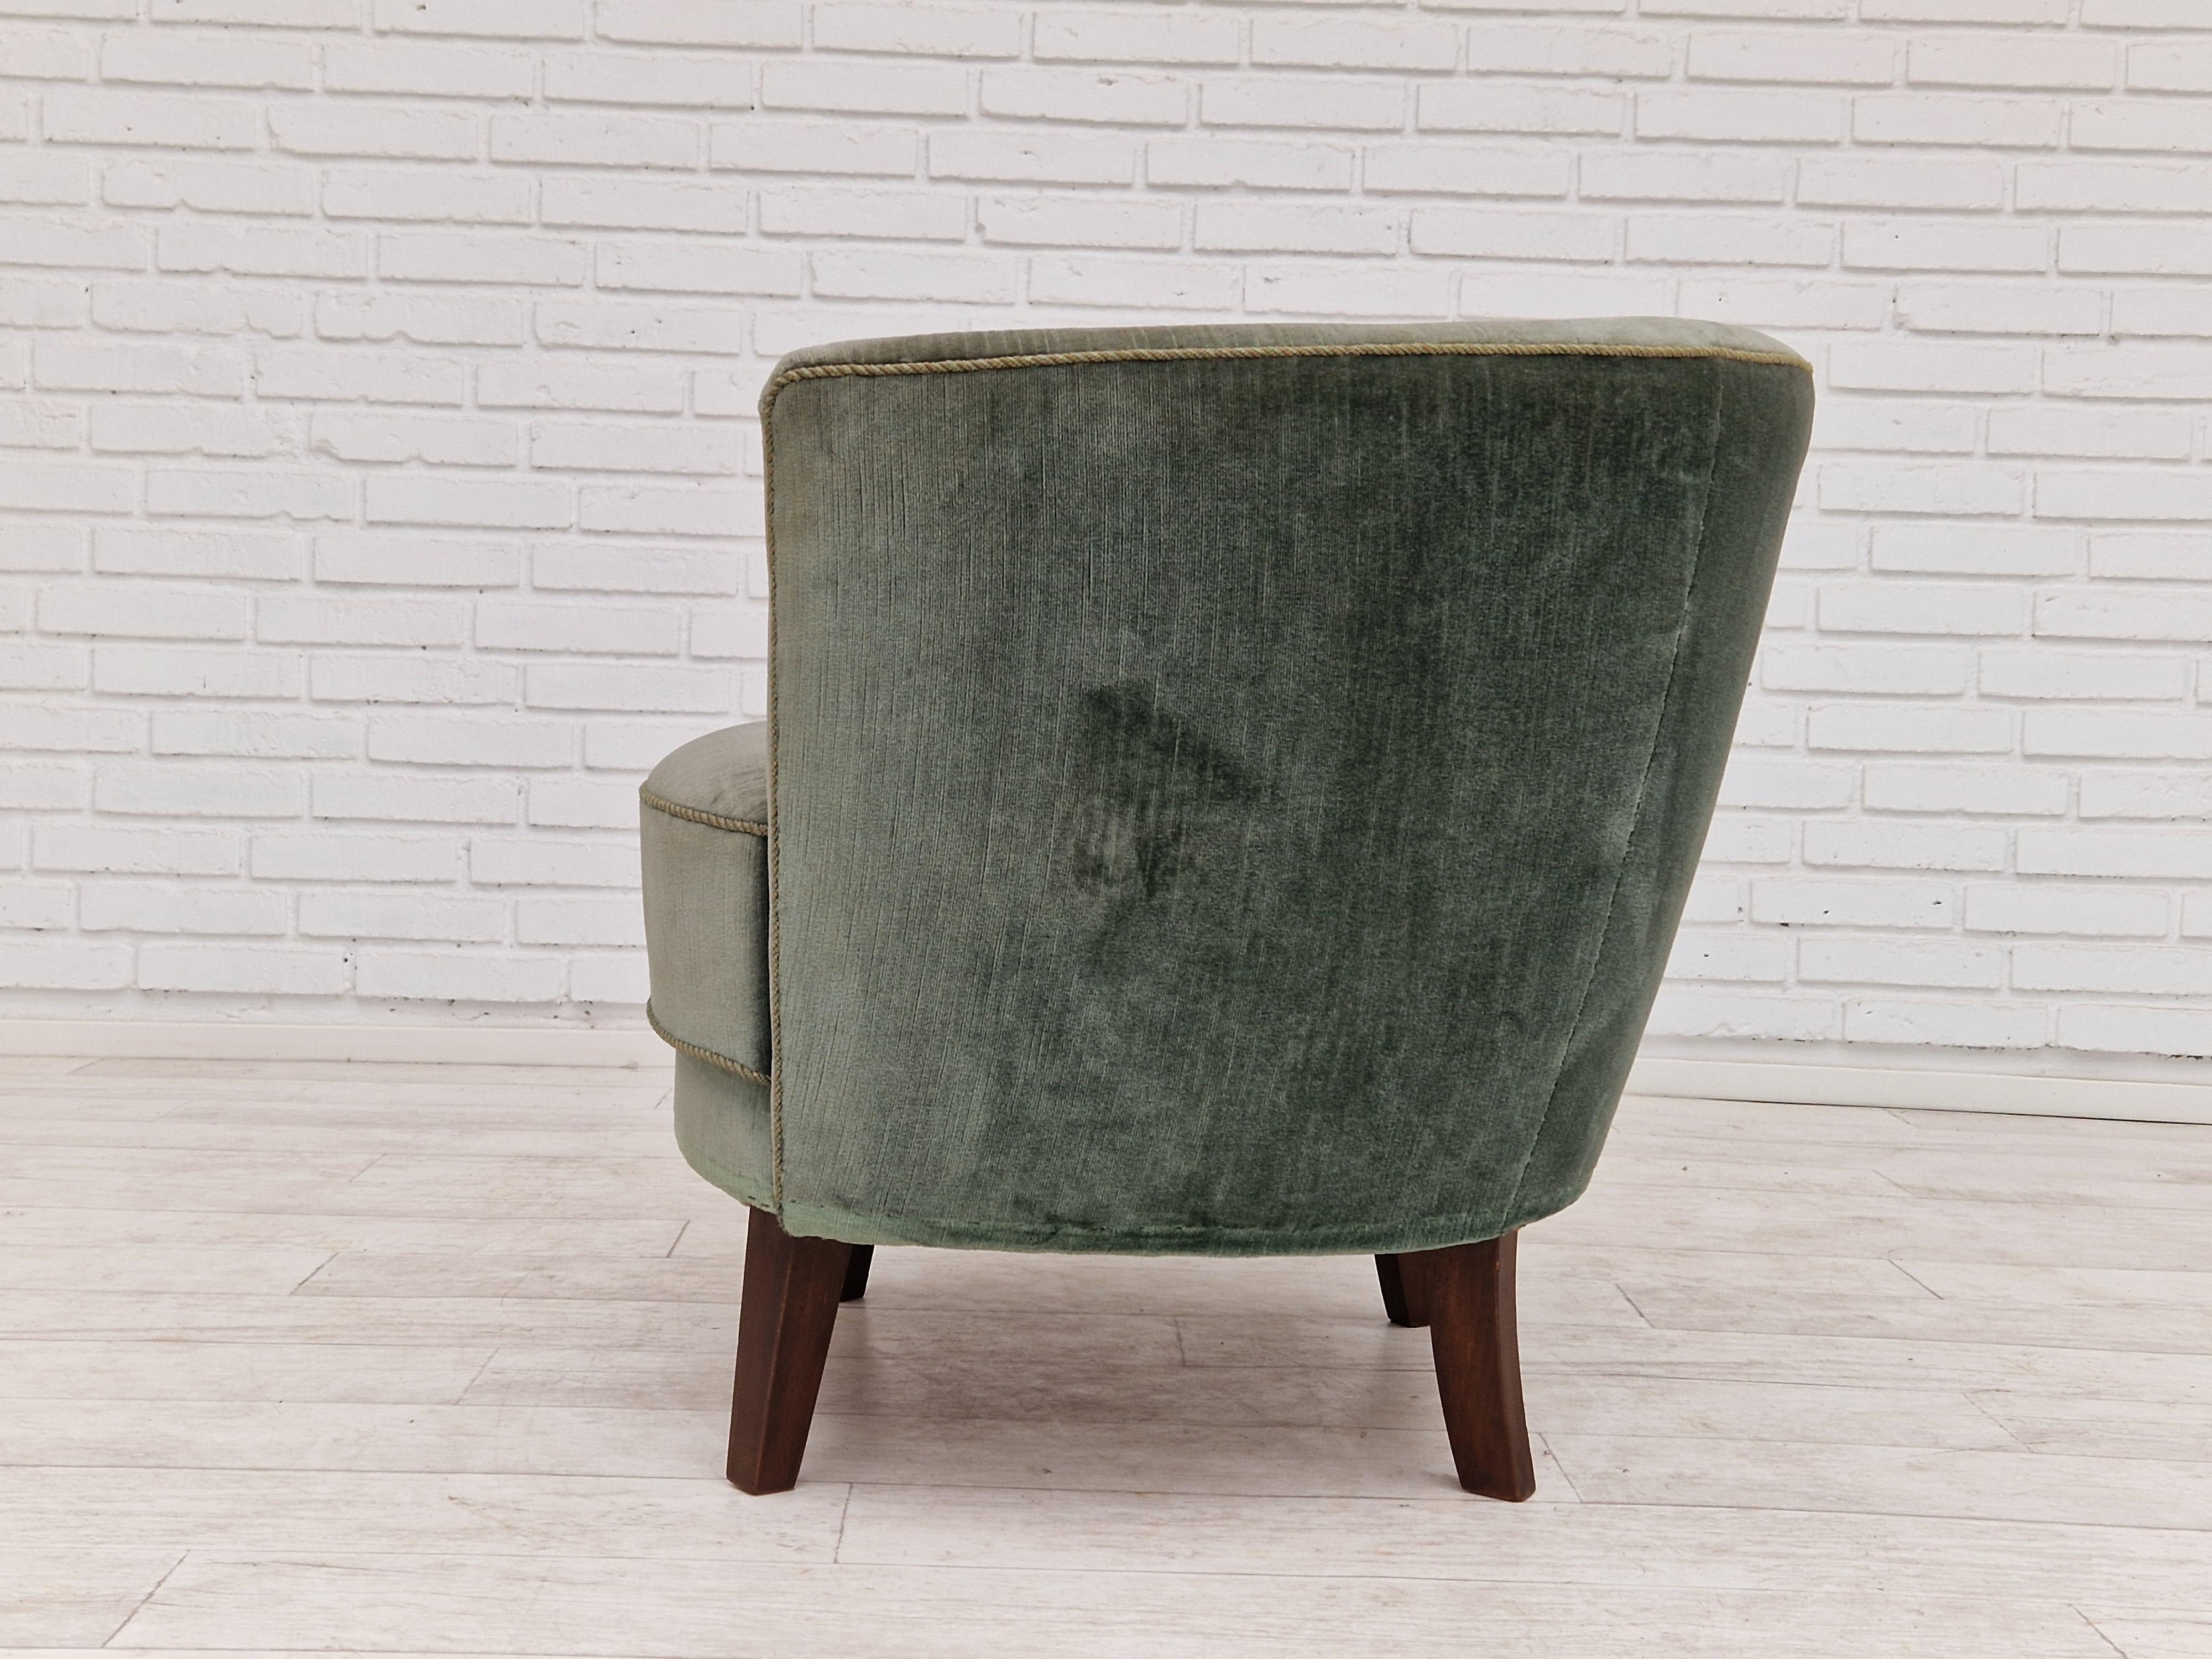 Fabric 1960s, Danish Design, Curved Loungechair, Original Very Good Condition For Sale